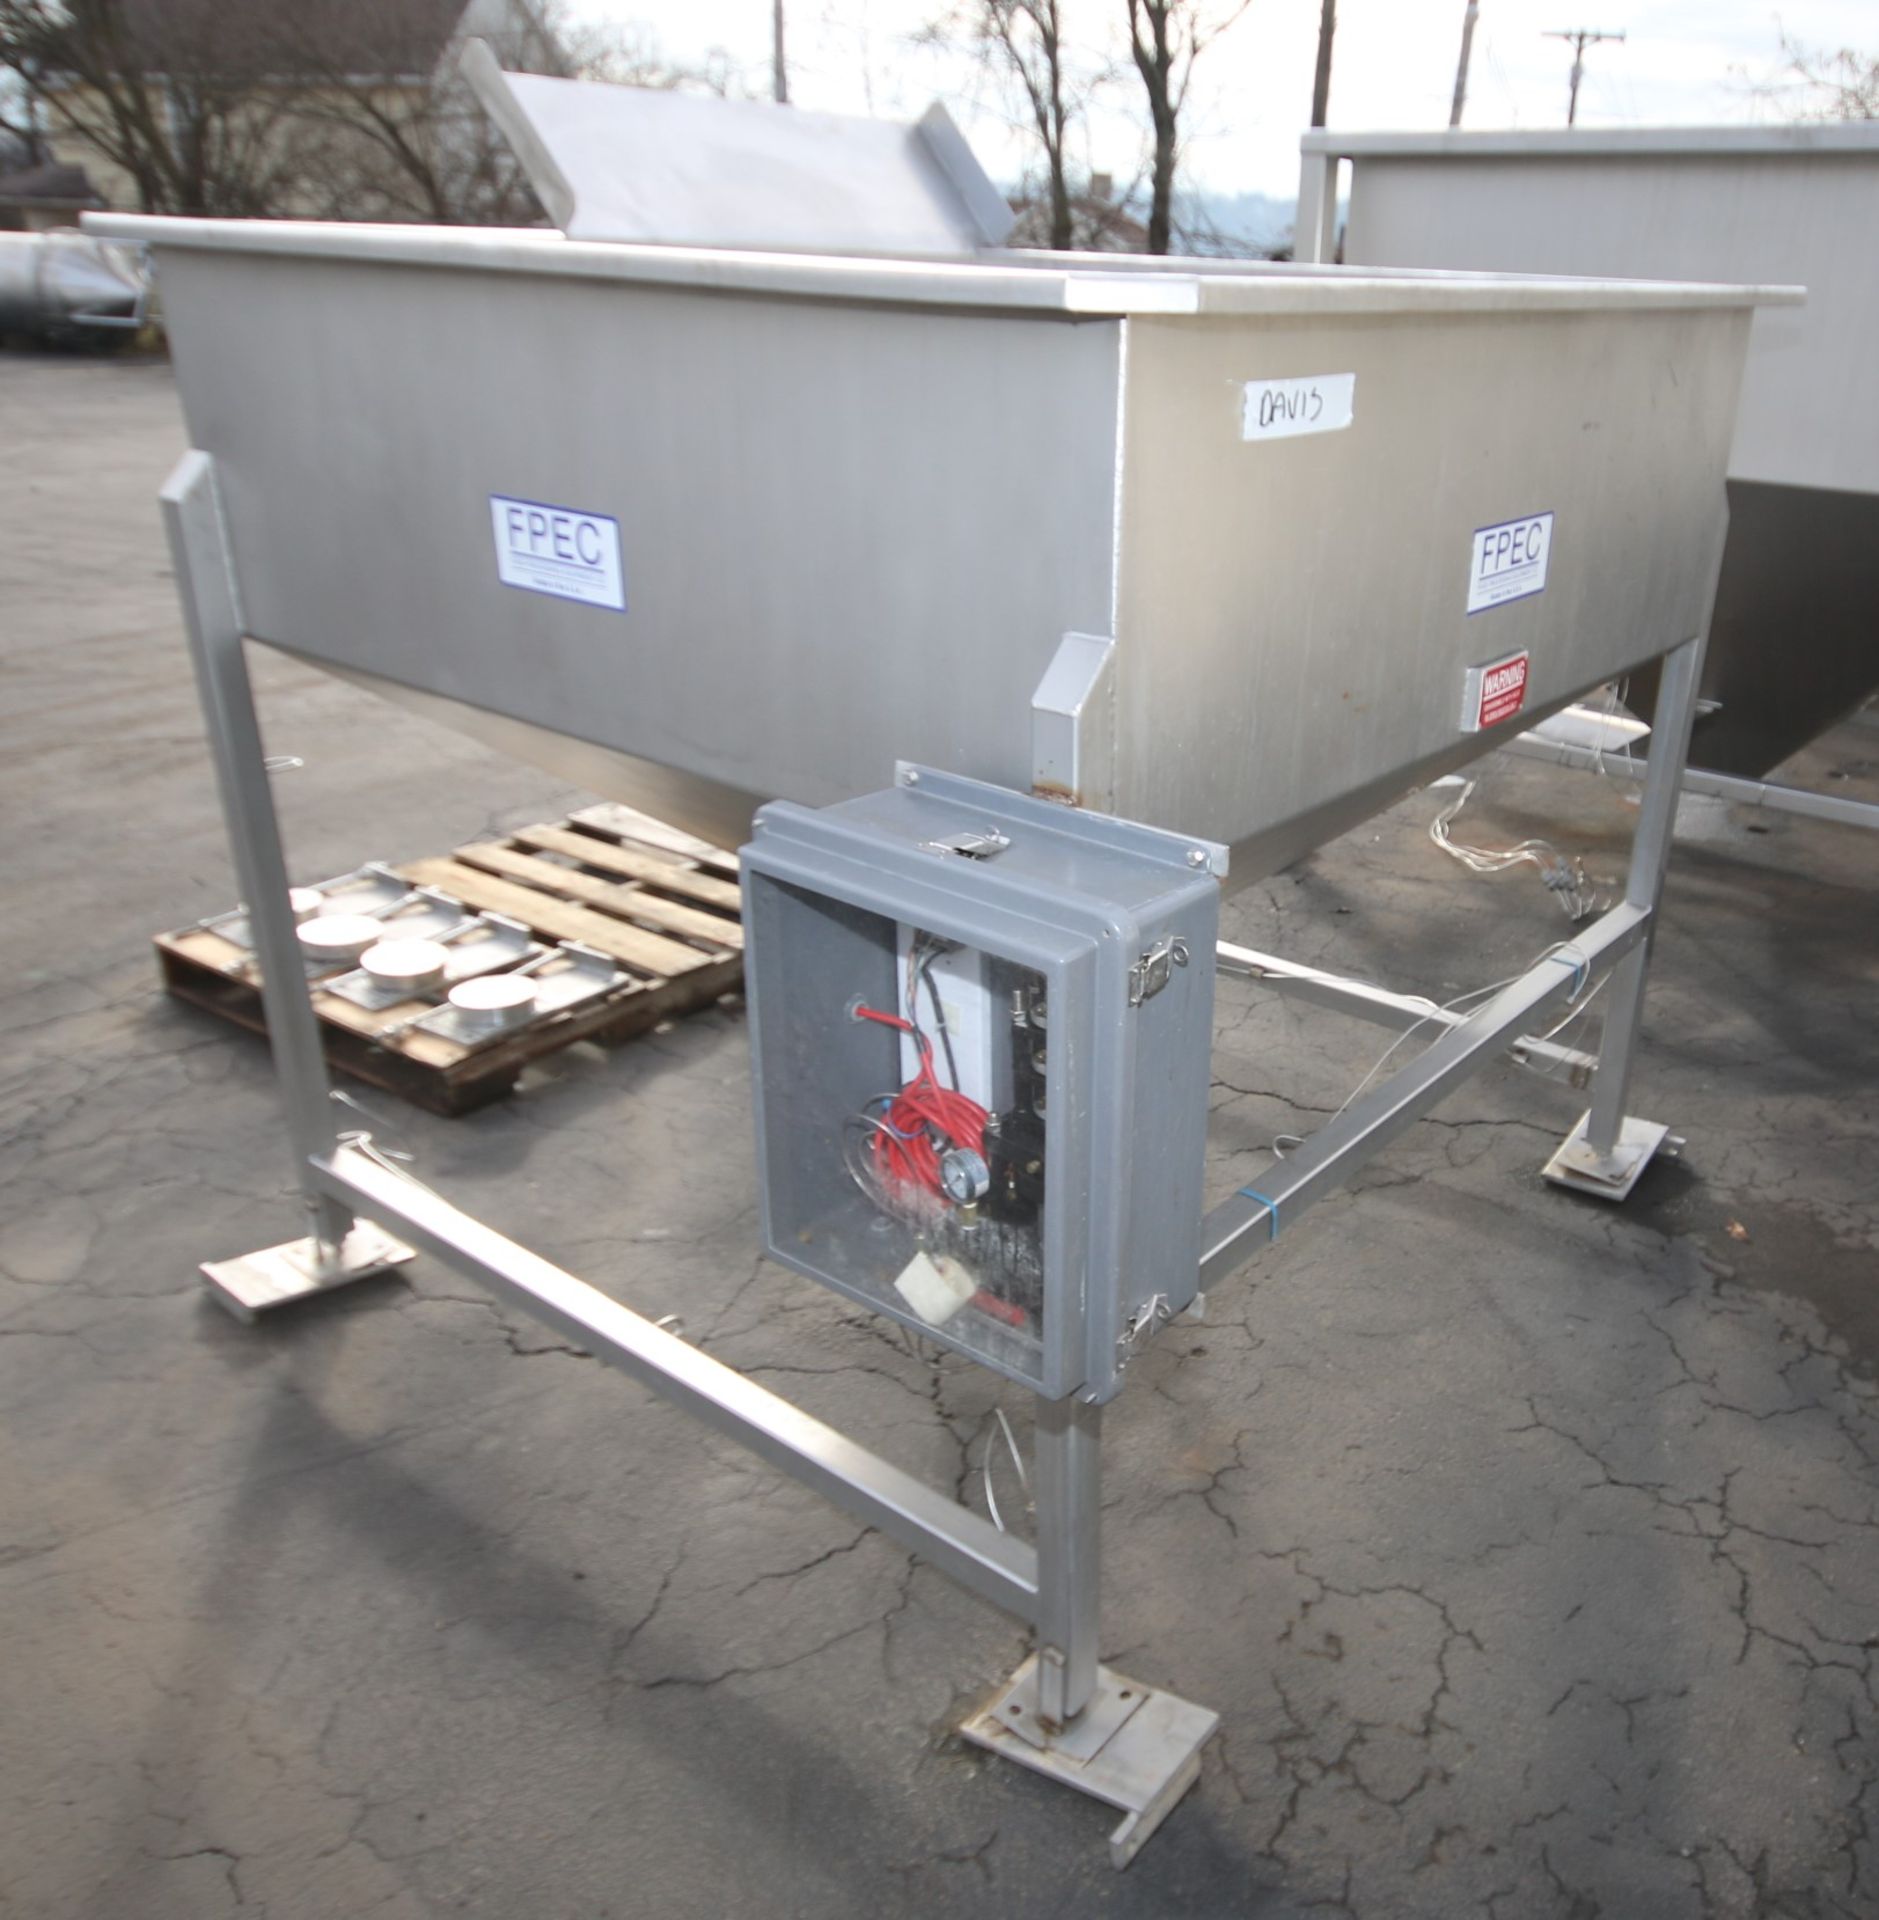 FPEC 60" W x 60" L x 36" D S/S Feed Hopper, Model VFH86, SN 6244, with 6" Discharge, Mounted on S/ - Image 3 of 9